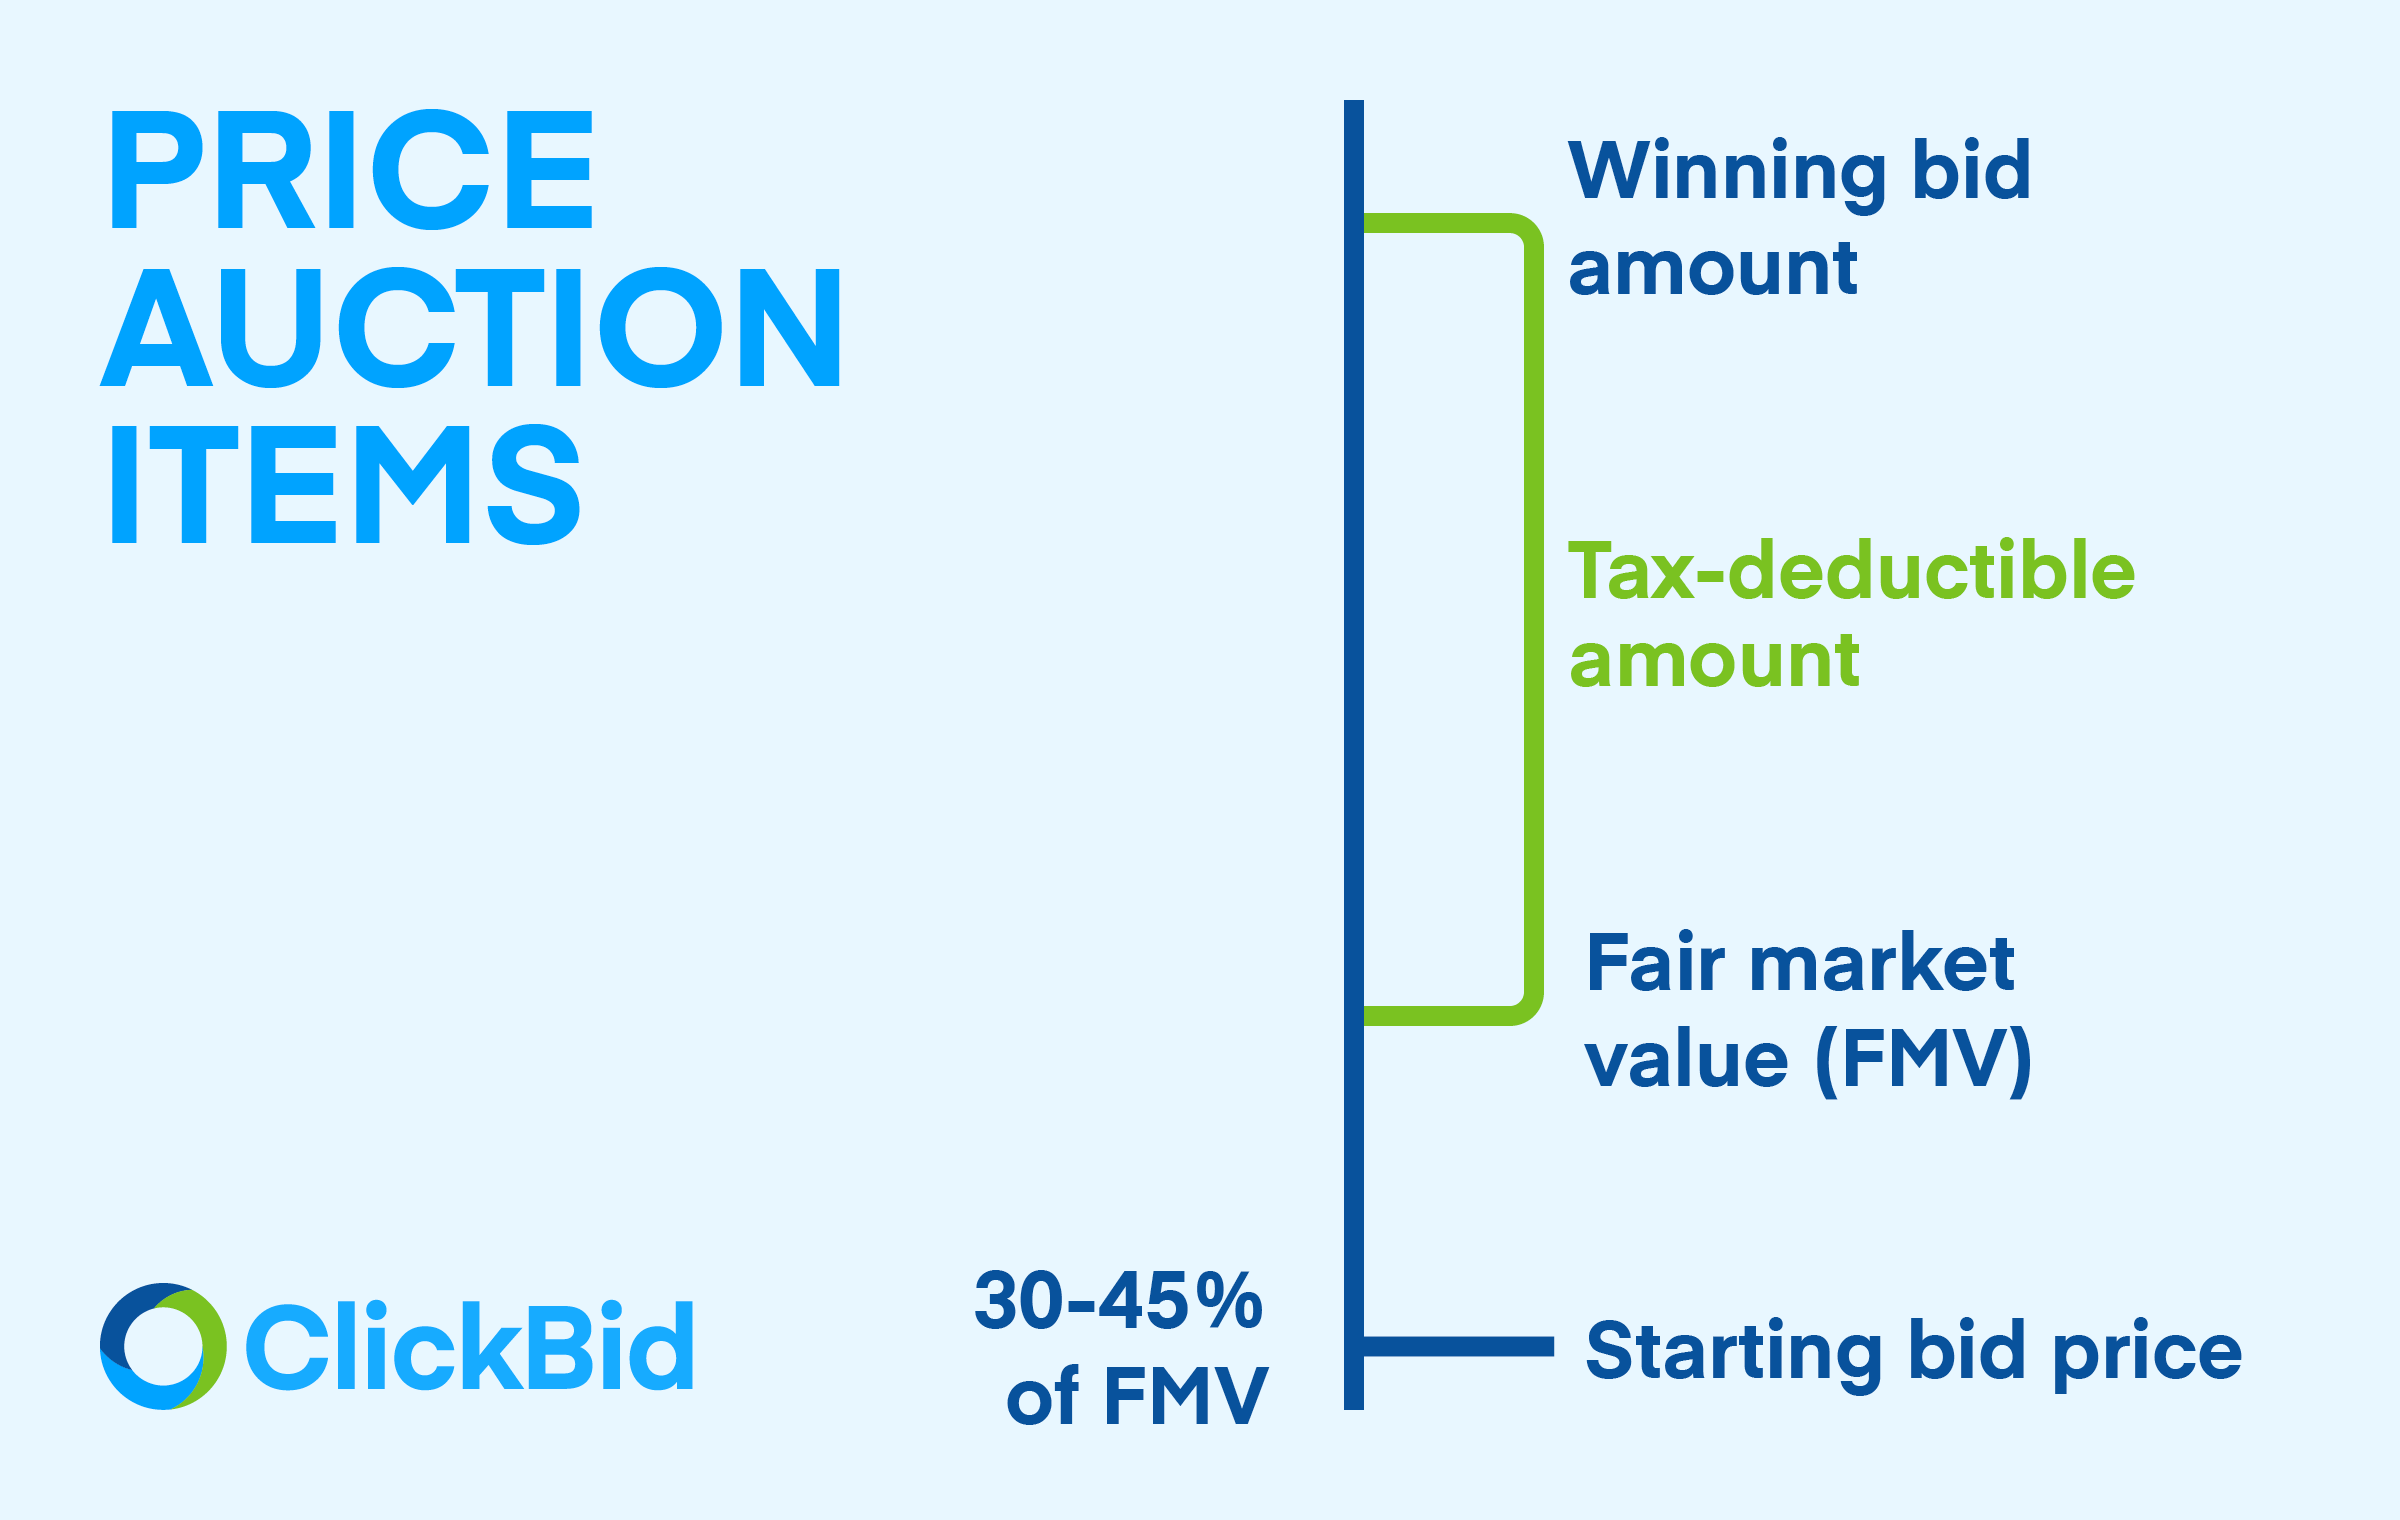 This image shows the breakdown of a winning bid from a fundraising auction, which is not completely tax-deductible according to fundraising requirements.